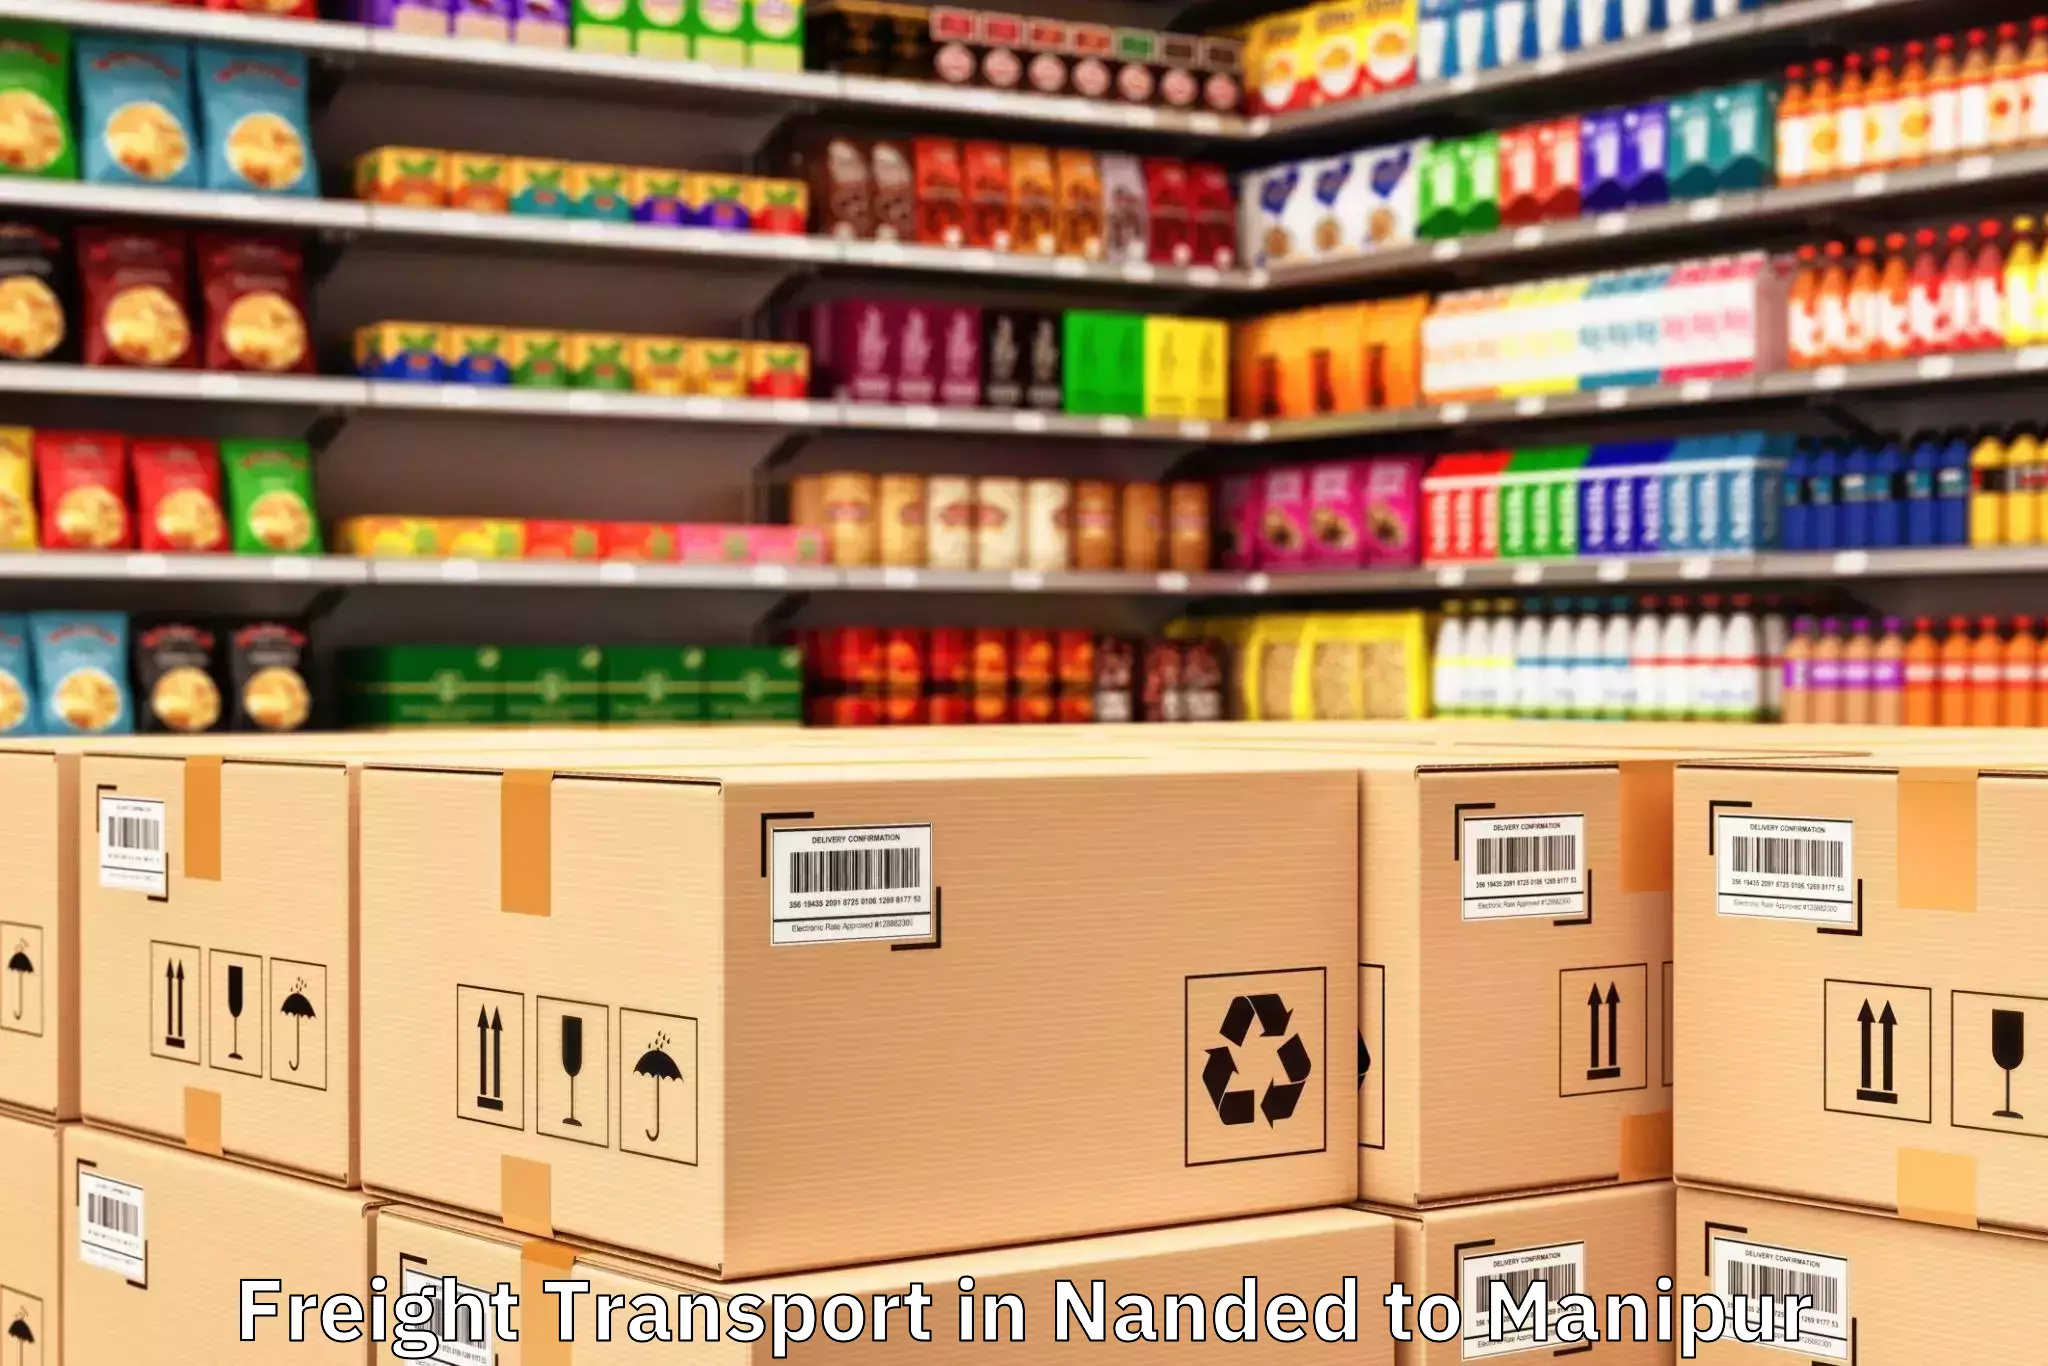 Discover Nanded to Lamshang Freight Transport